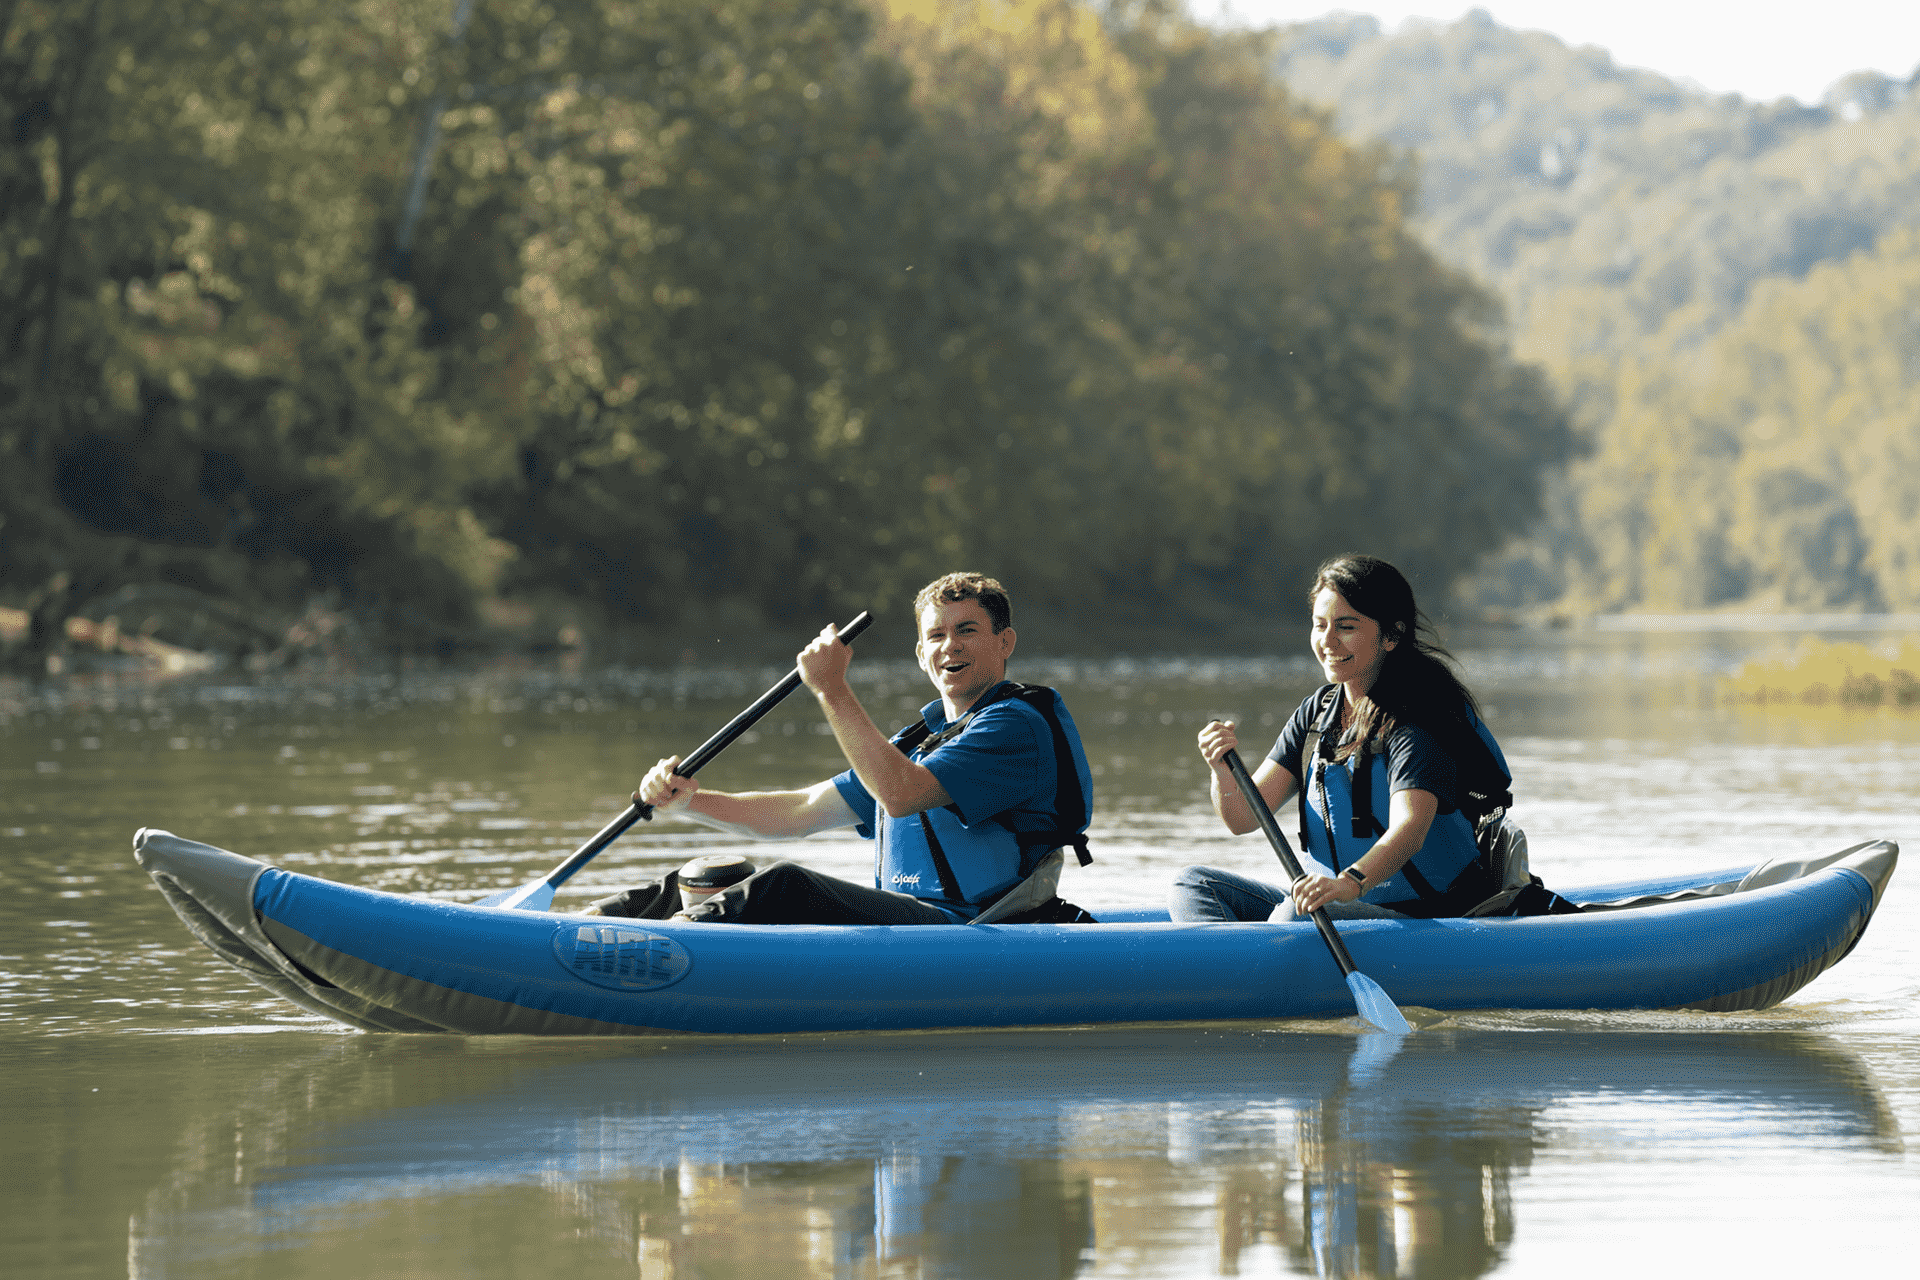 main picture of two people paddling in a canoe on a lake